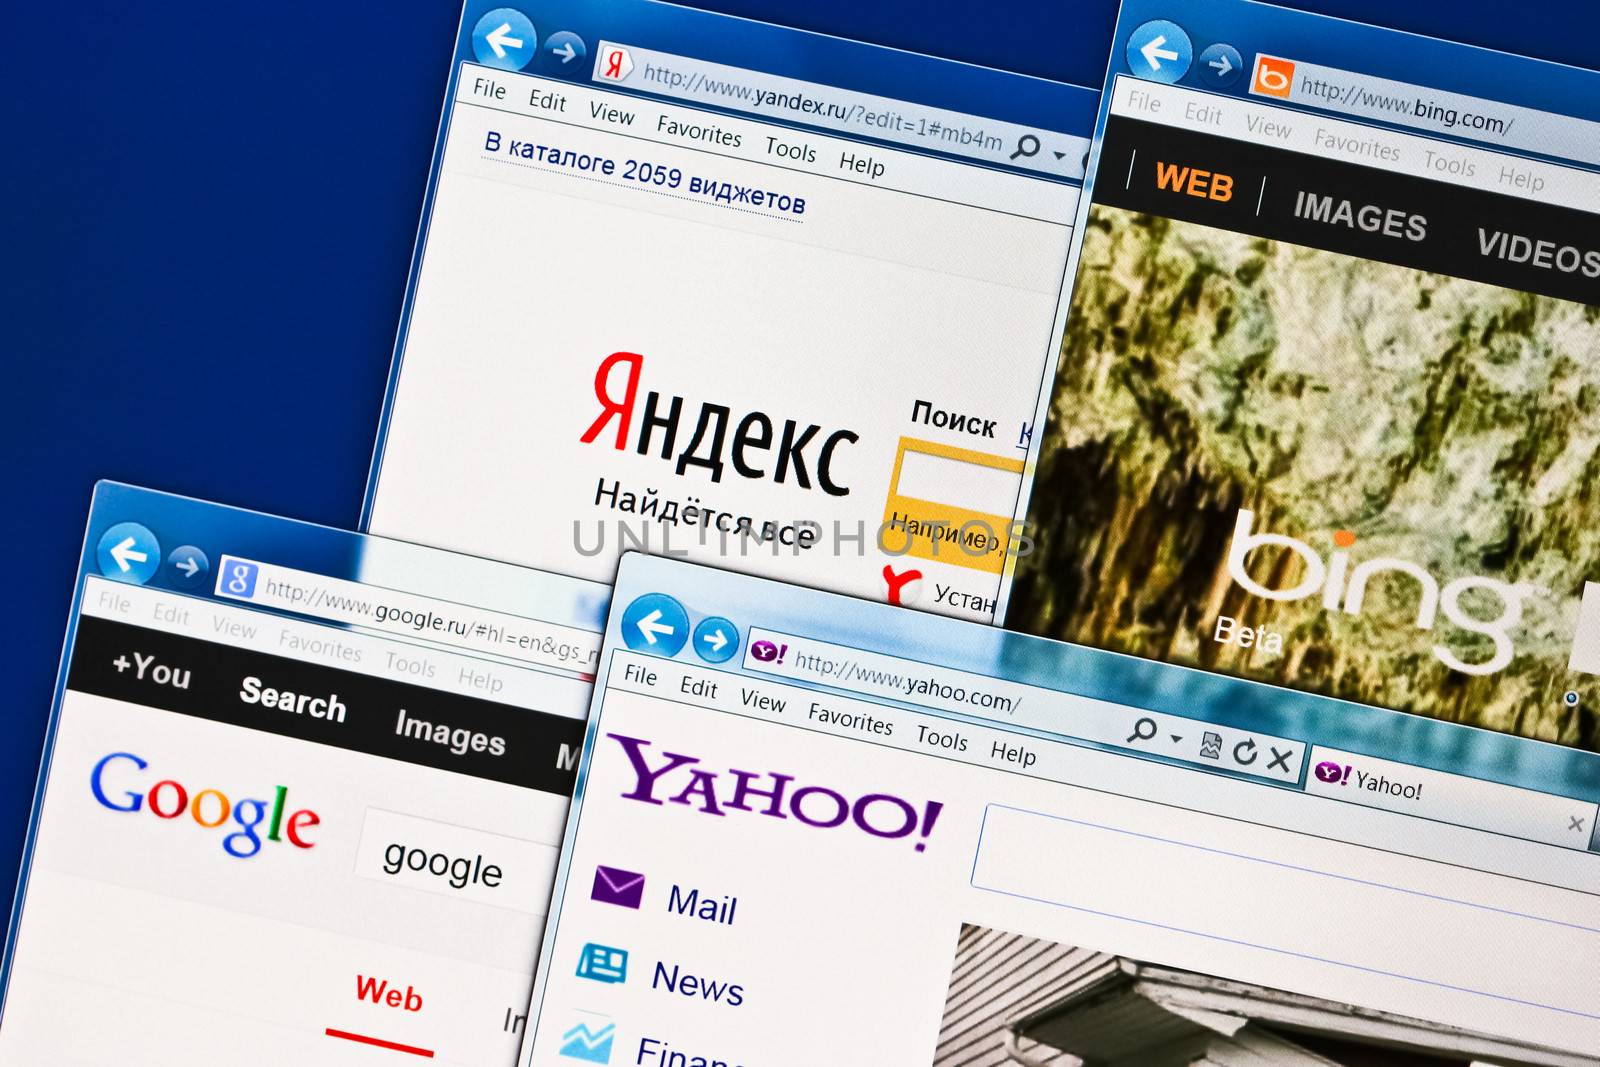 Open sites of SEO Yandex, Google, Bing, Yahoo by vicdemid